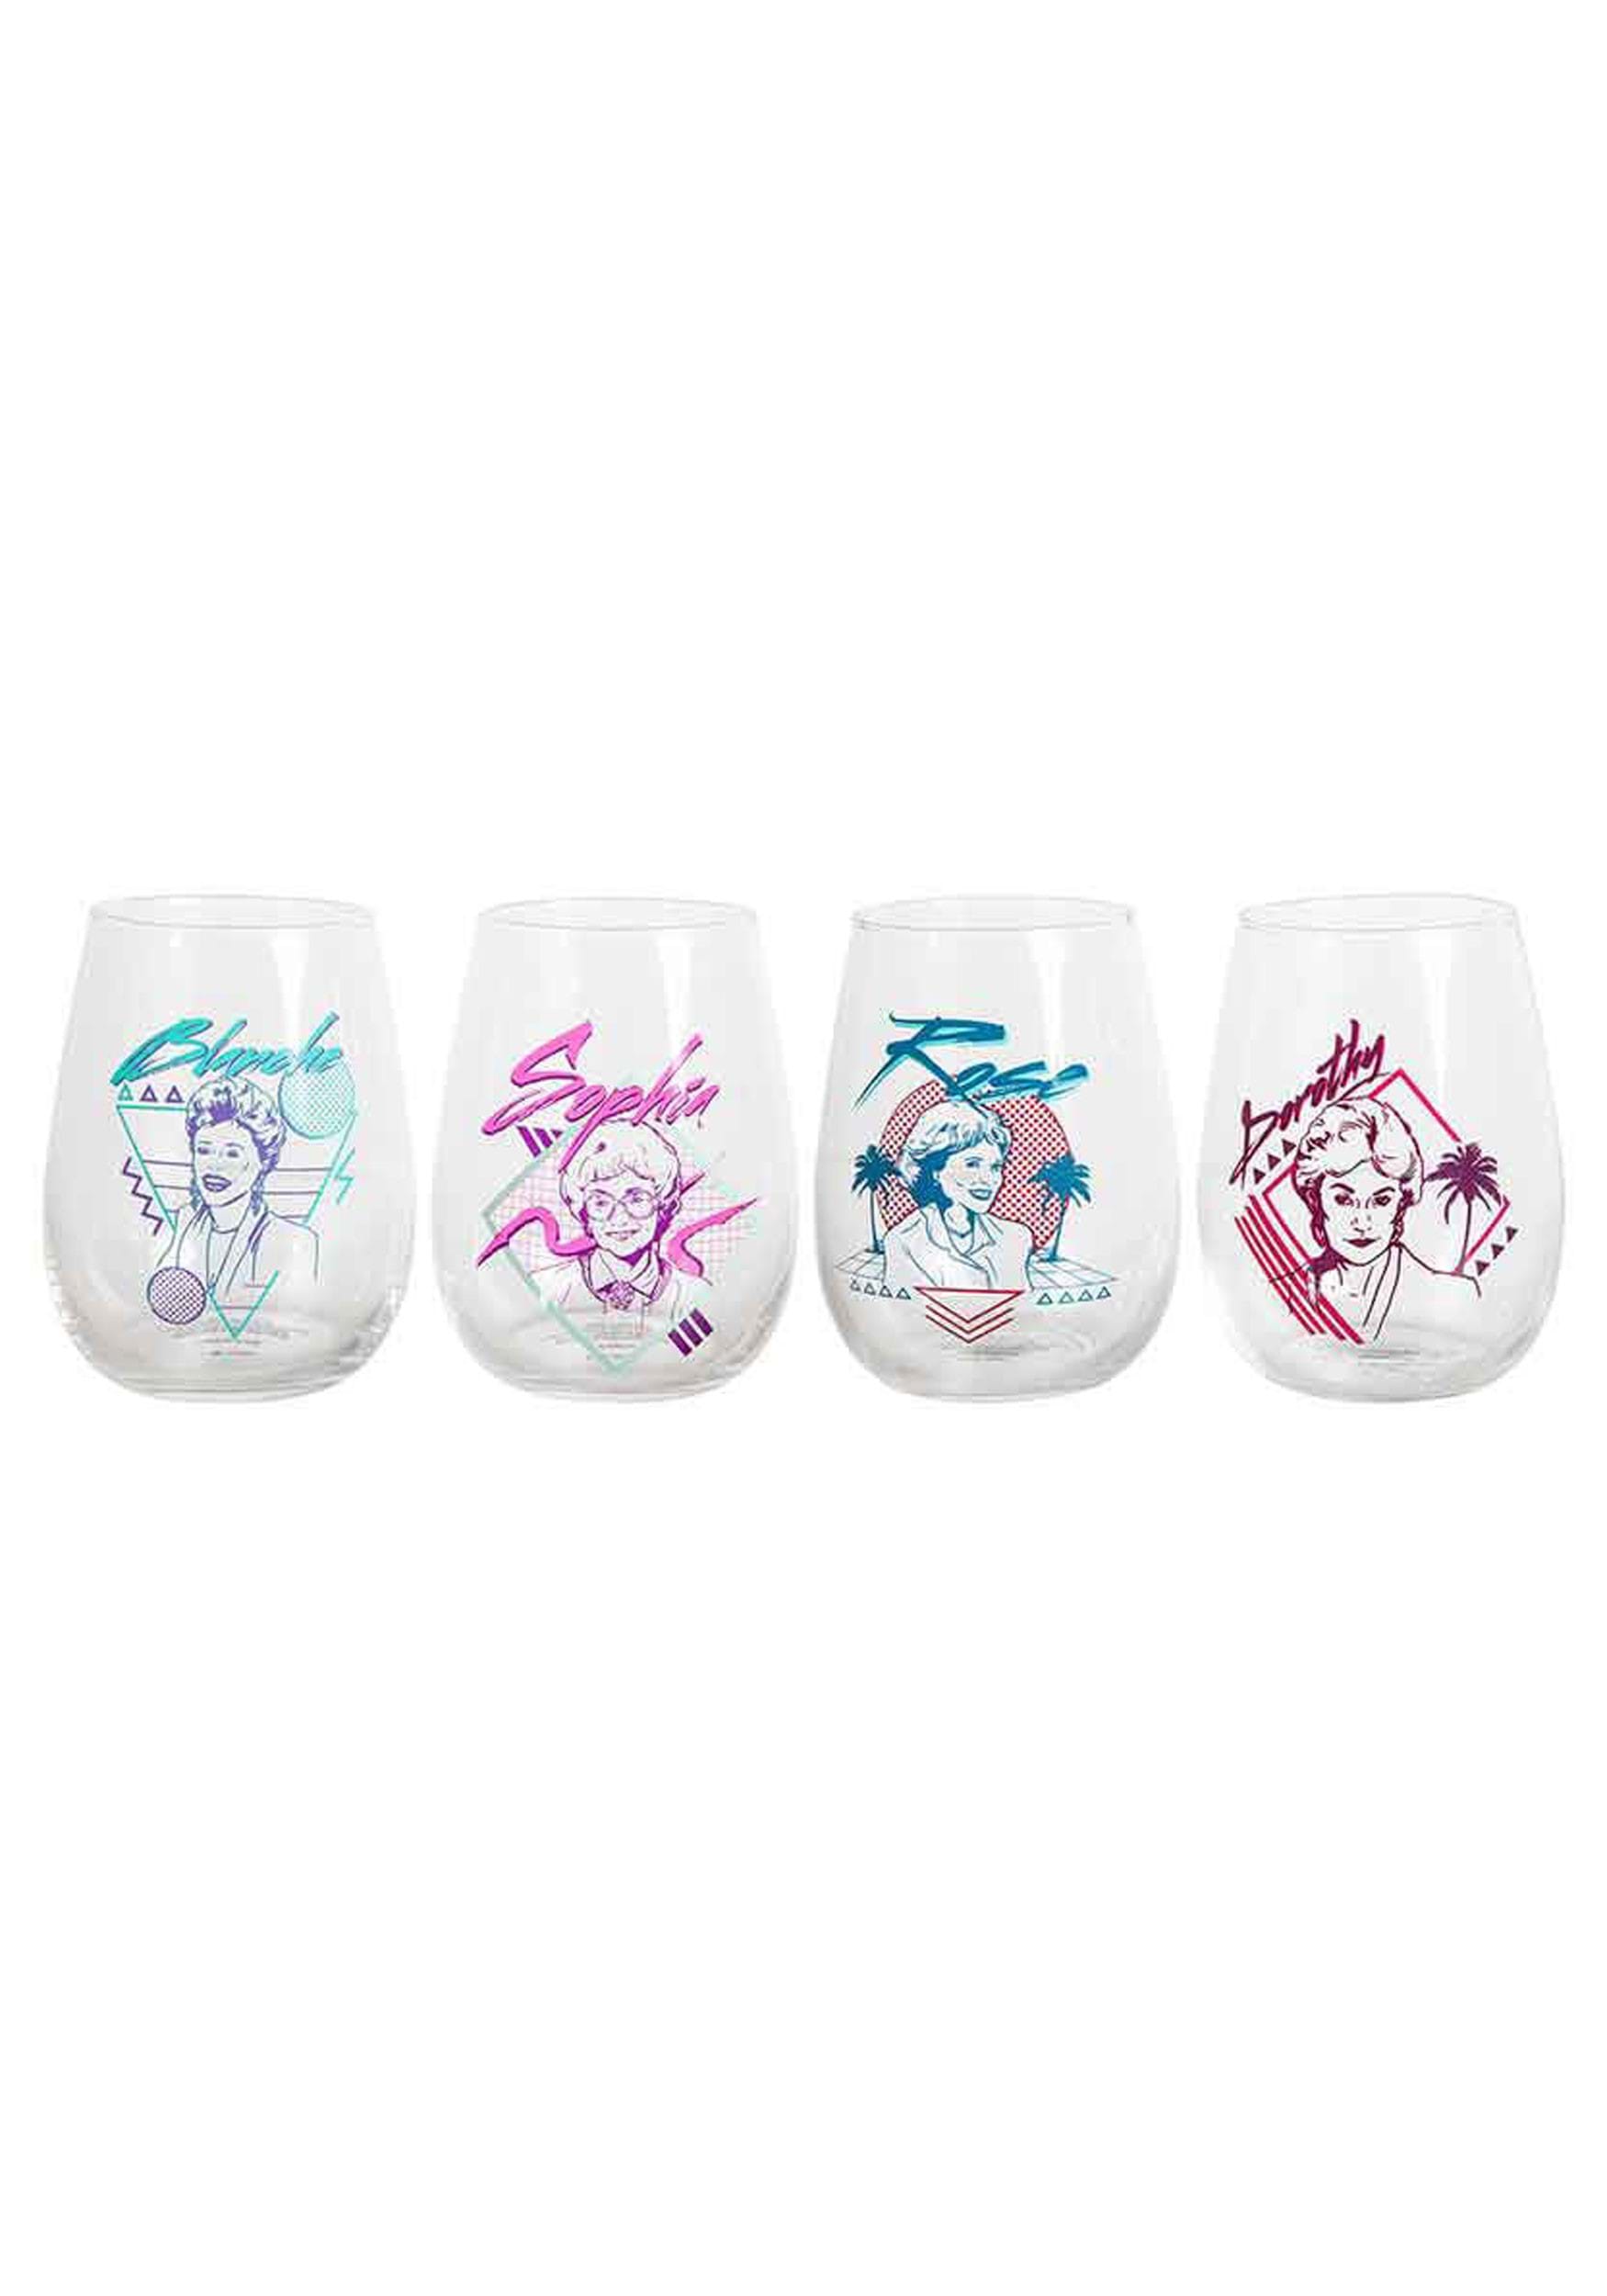 https://images.fun.com/products/80655/1-1/the-golden-girls-crew-18oz-contour-glass-set-of-4.jpg